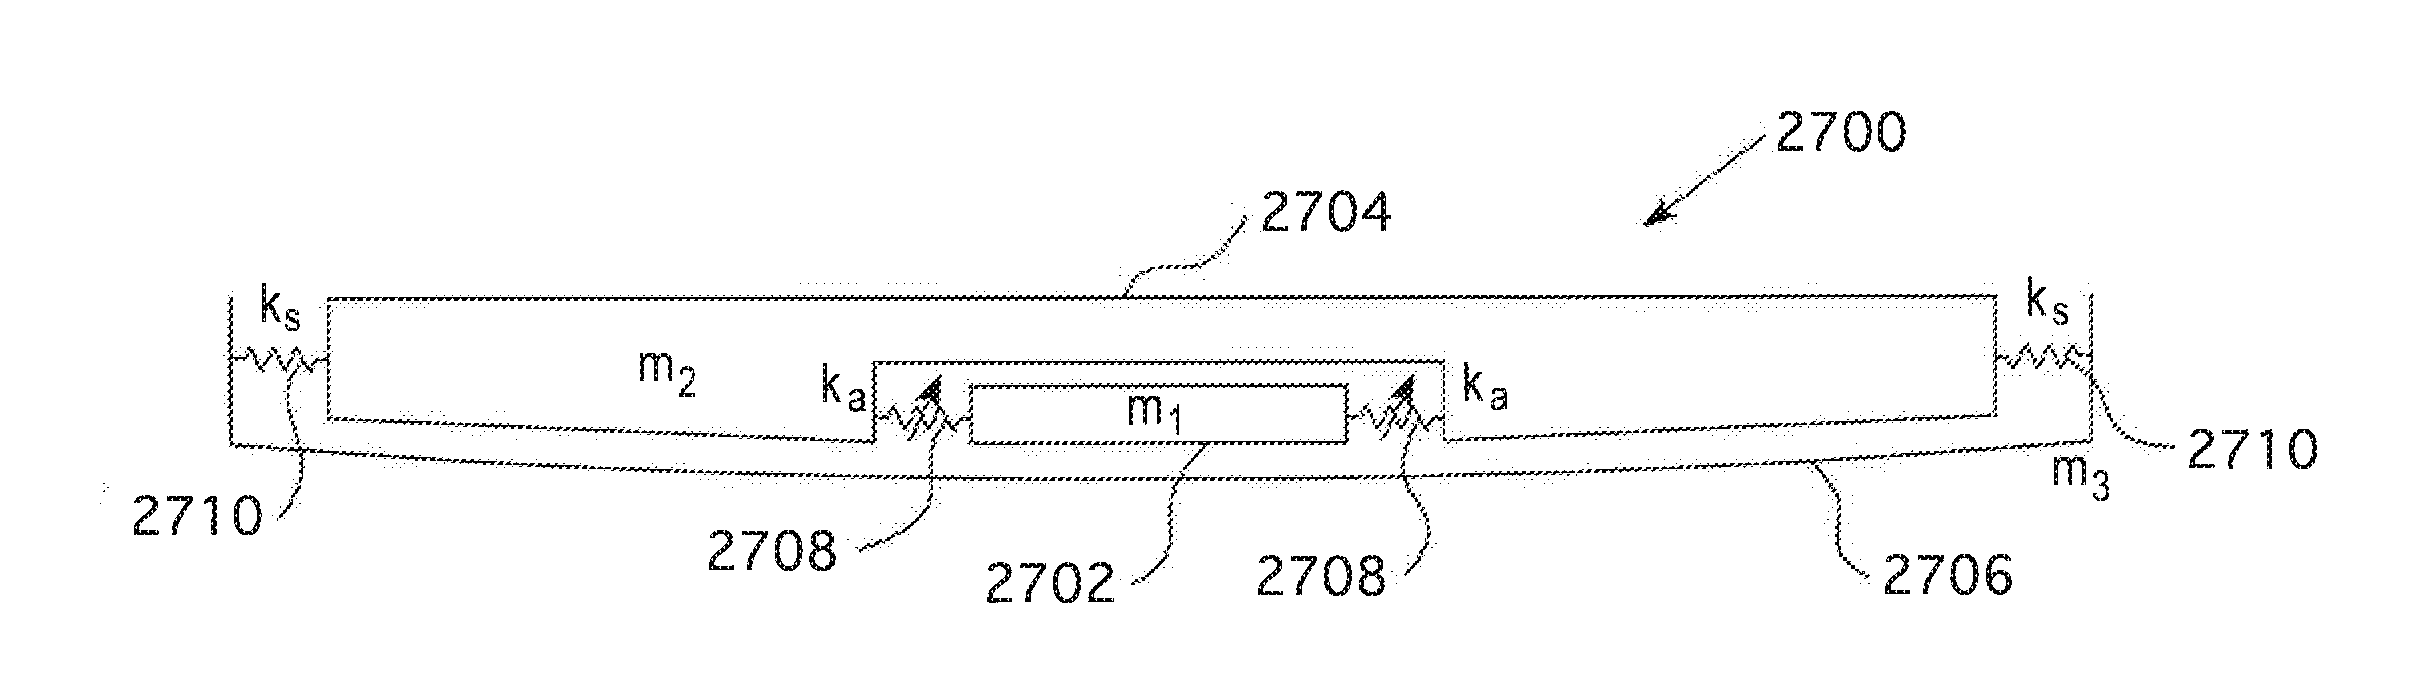 Dielectric elastomer membrane feedback apparatus, system and method